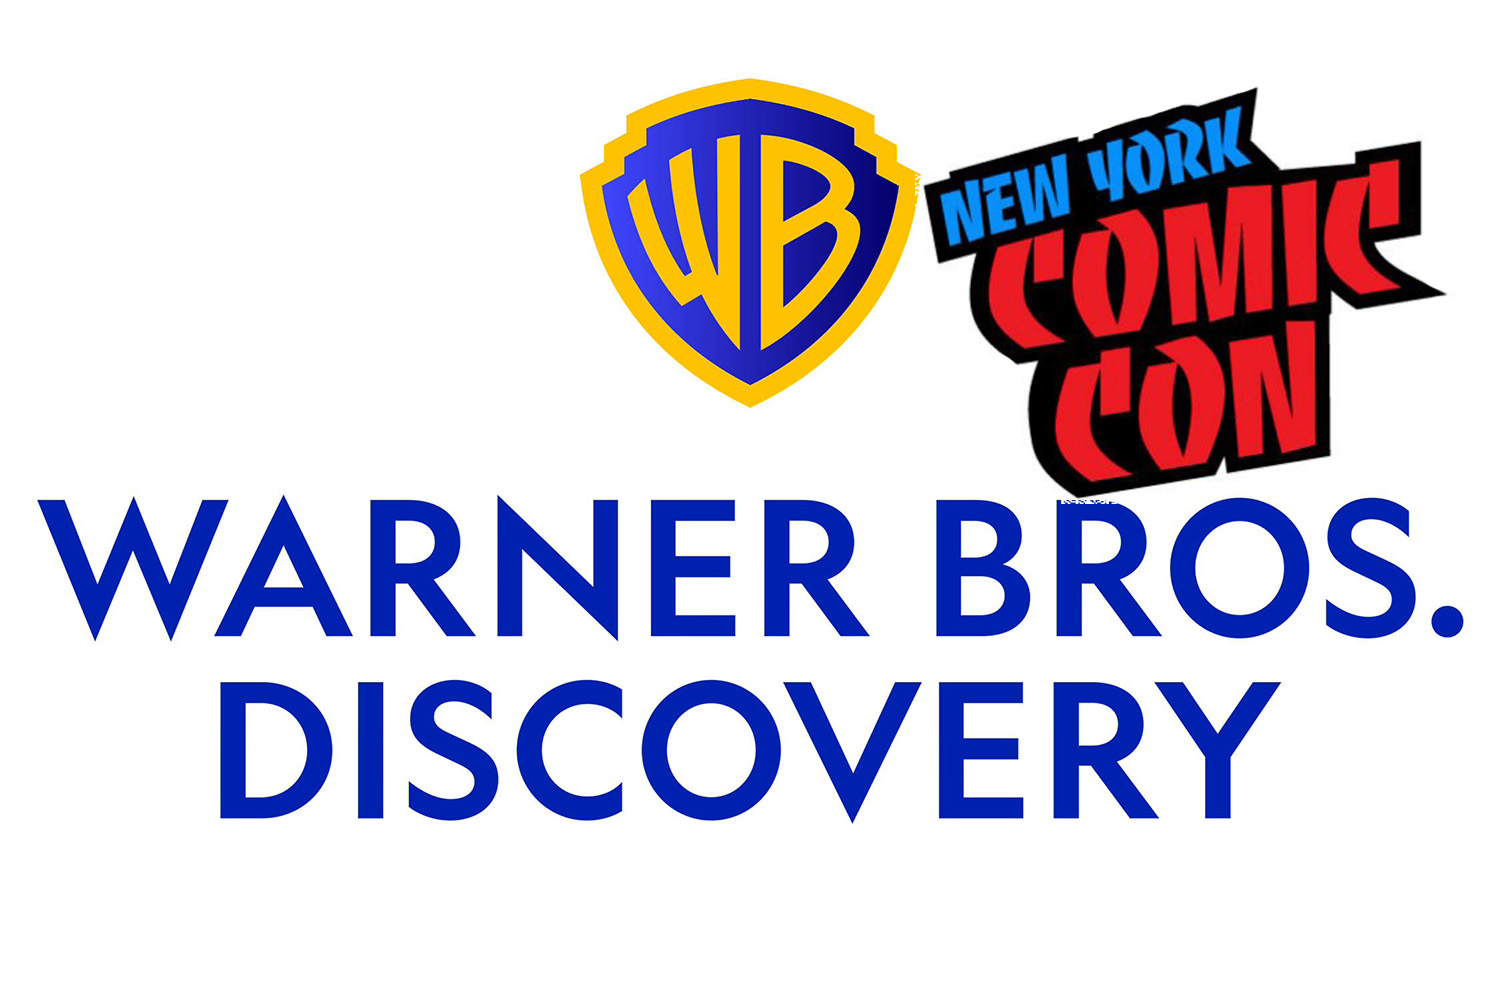 NYCC 2022: Warner Bros. Discovery announce panel schedule